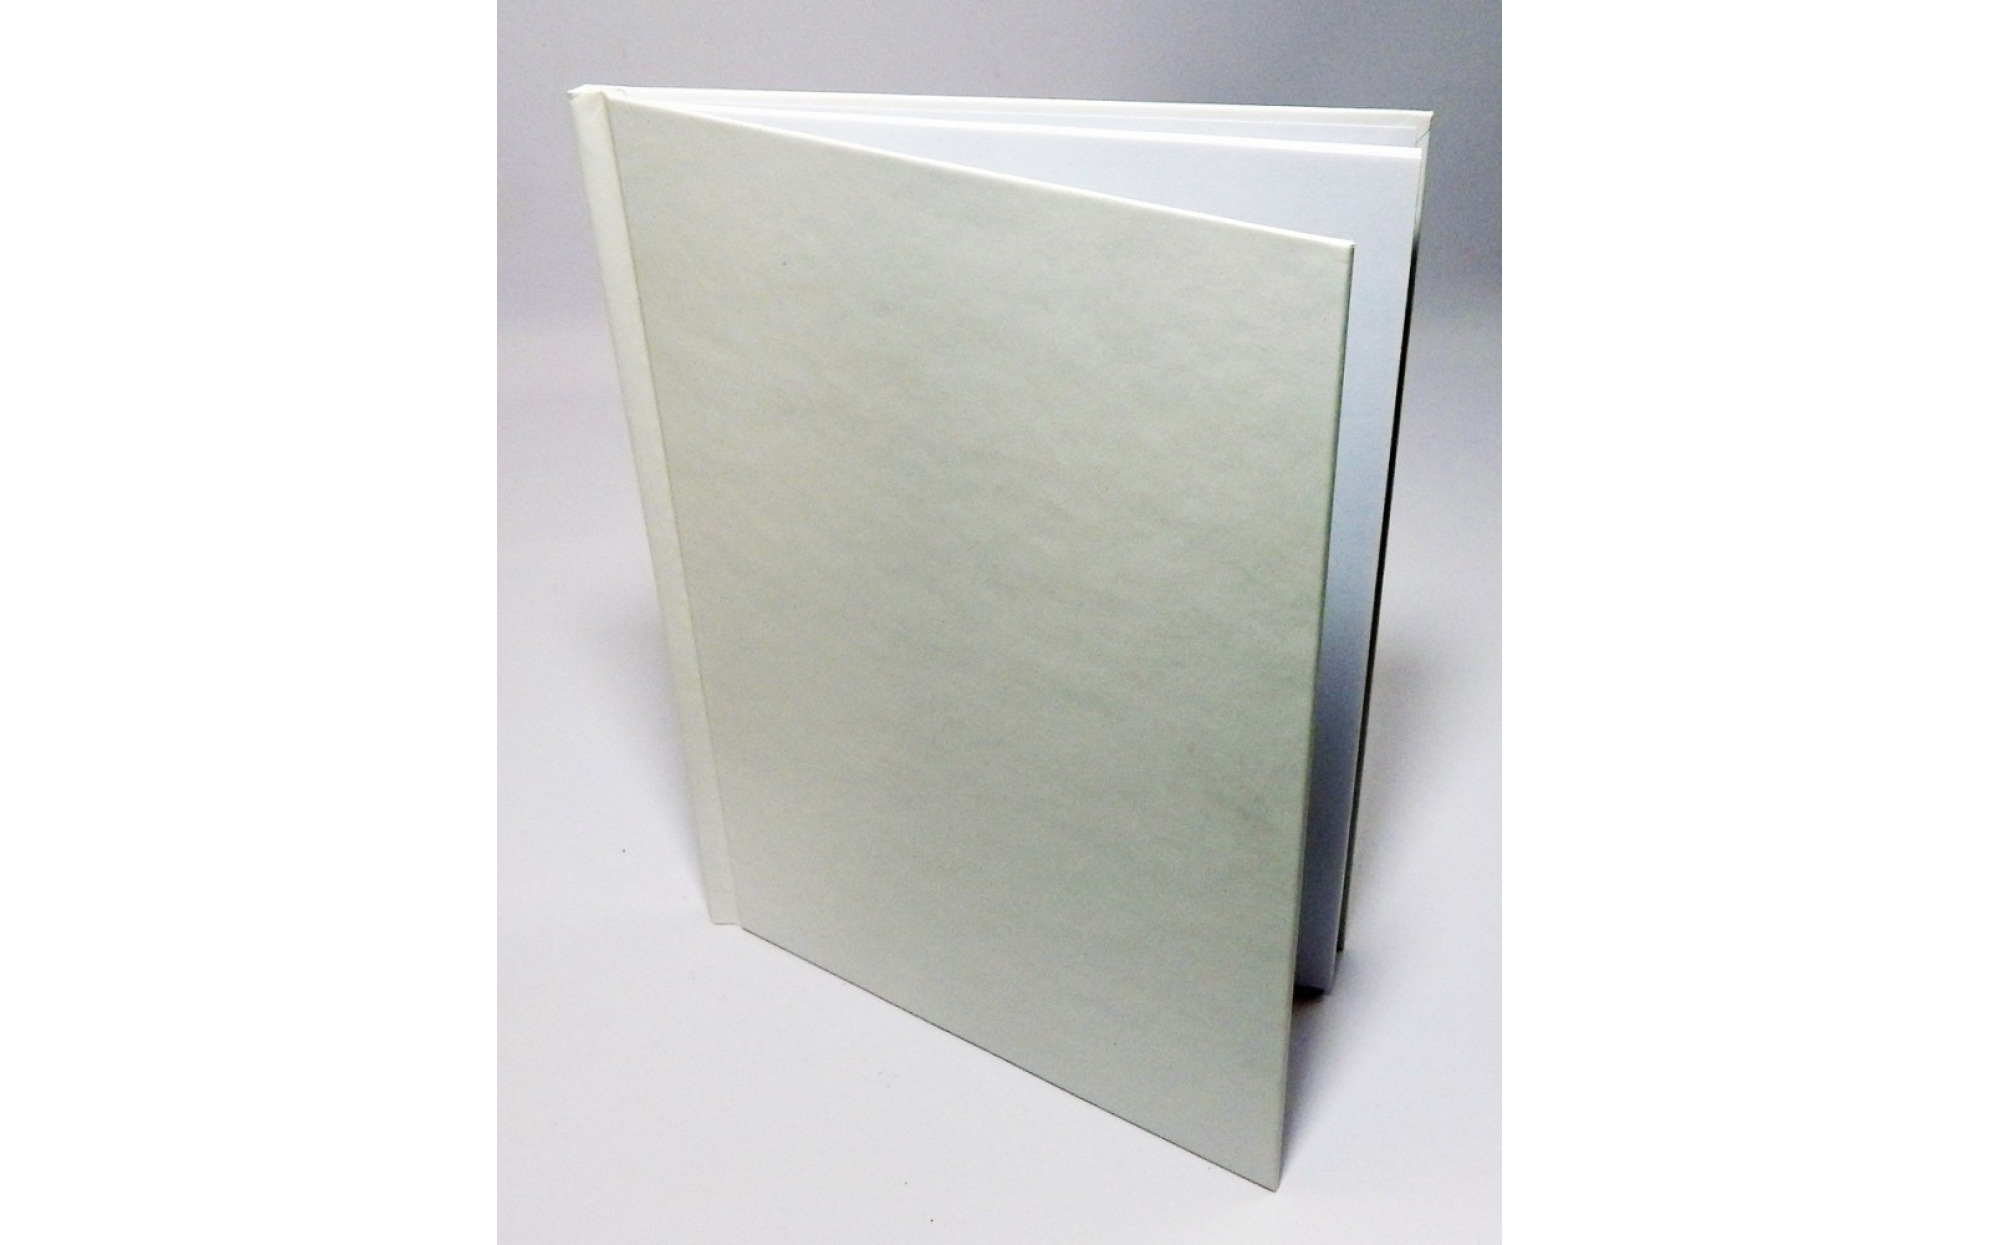 Hardcover Blank Book - Large